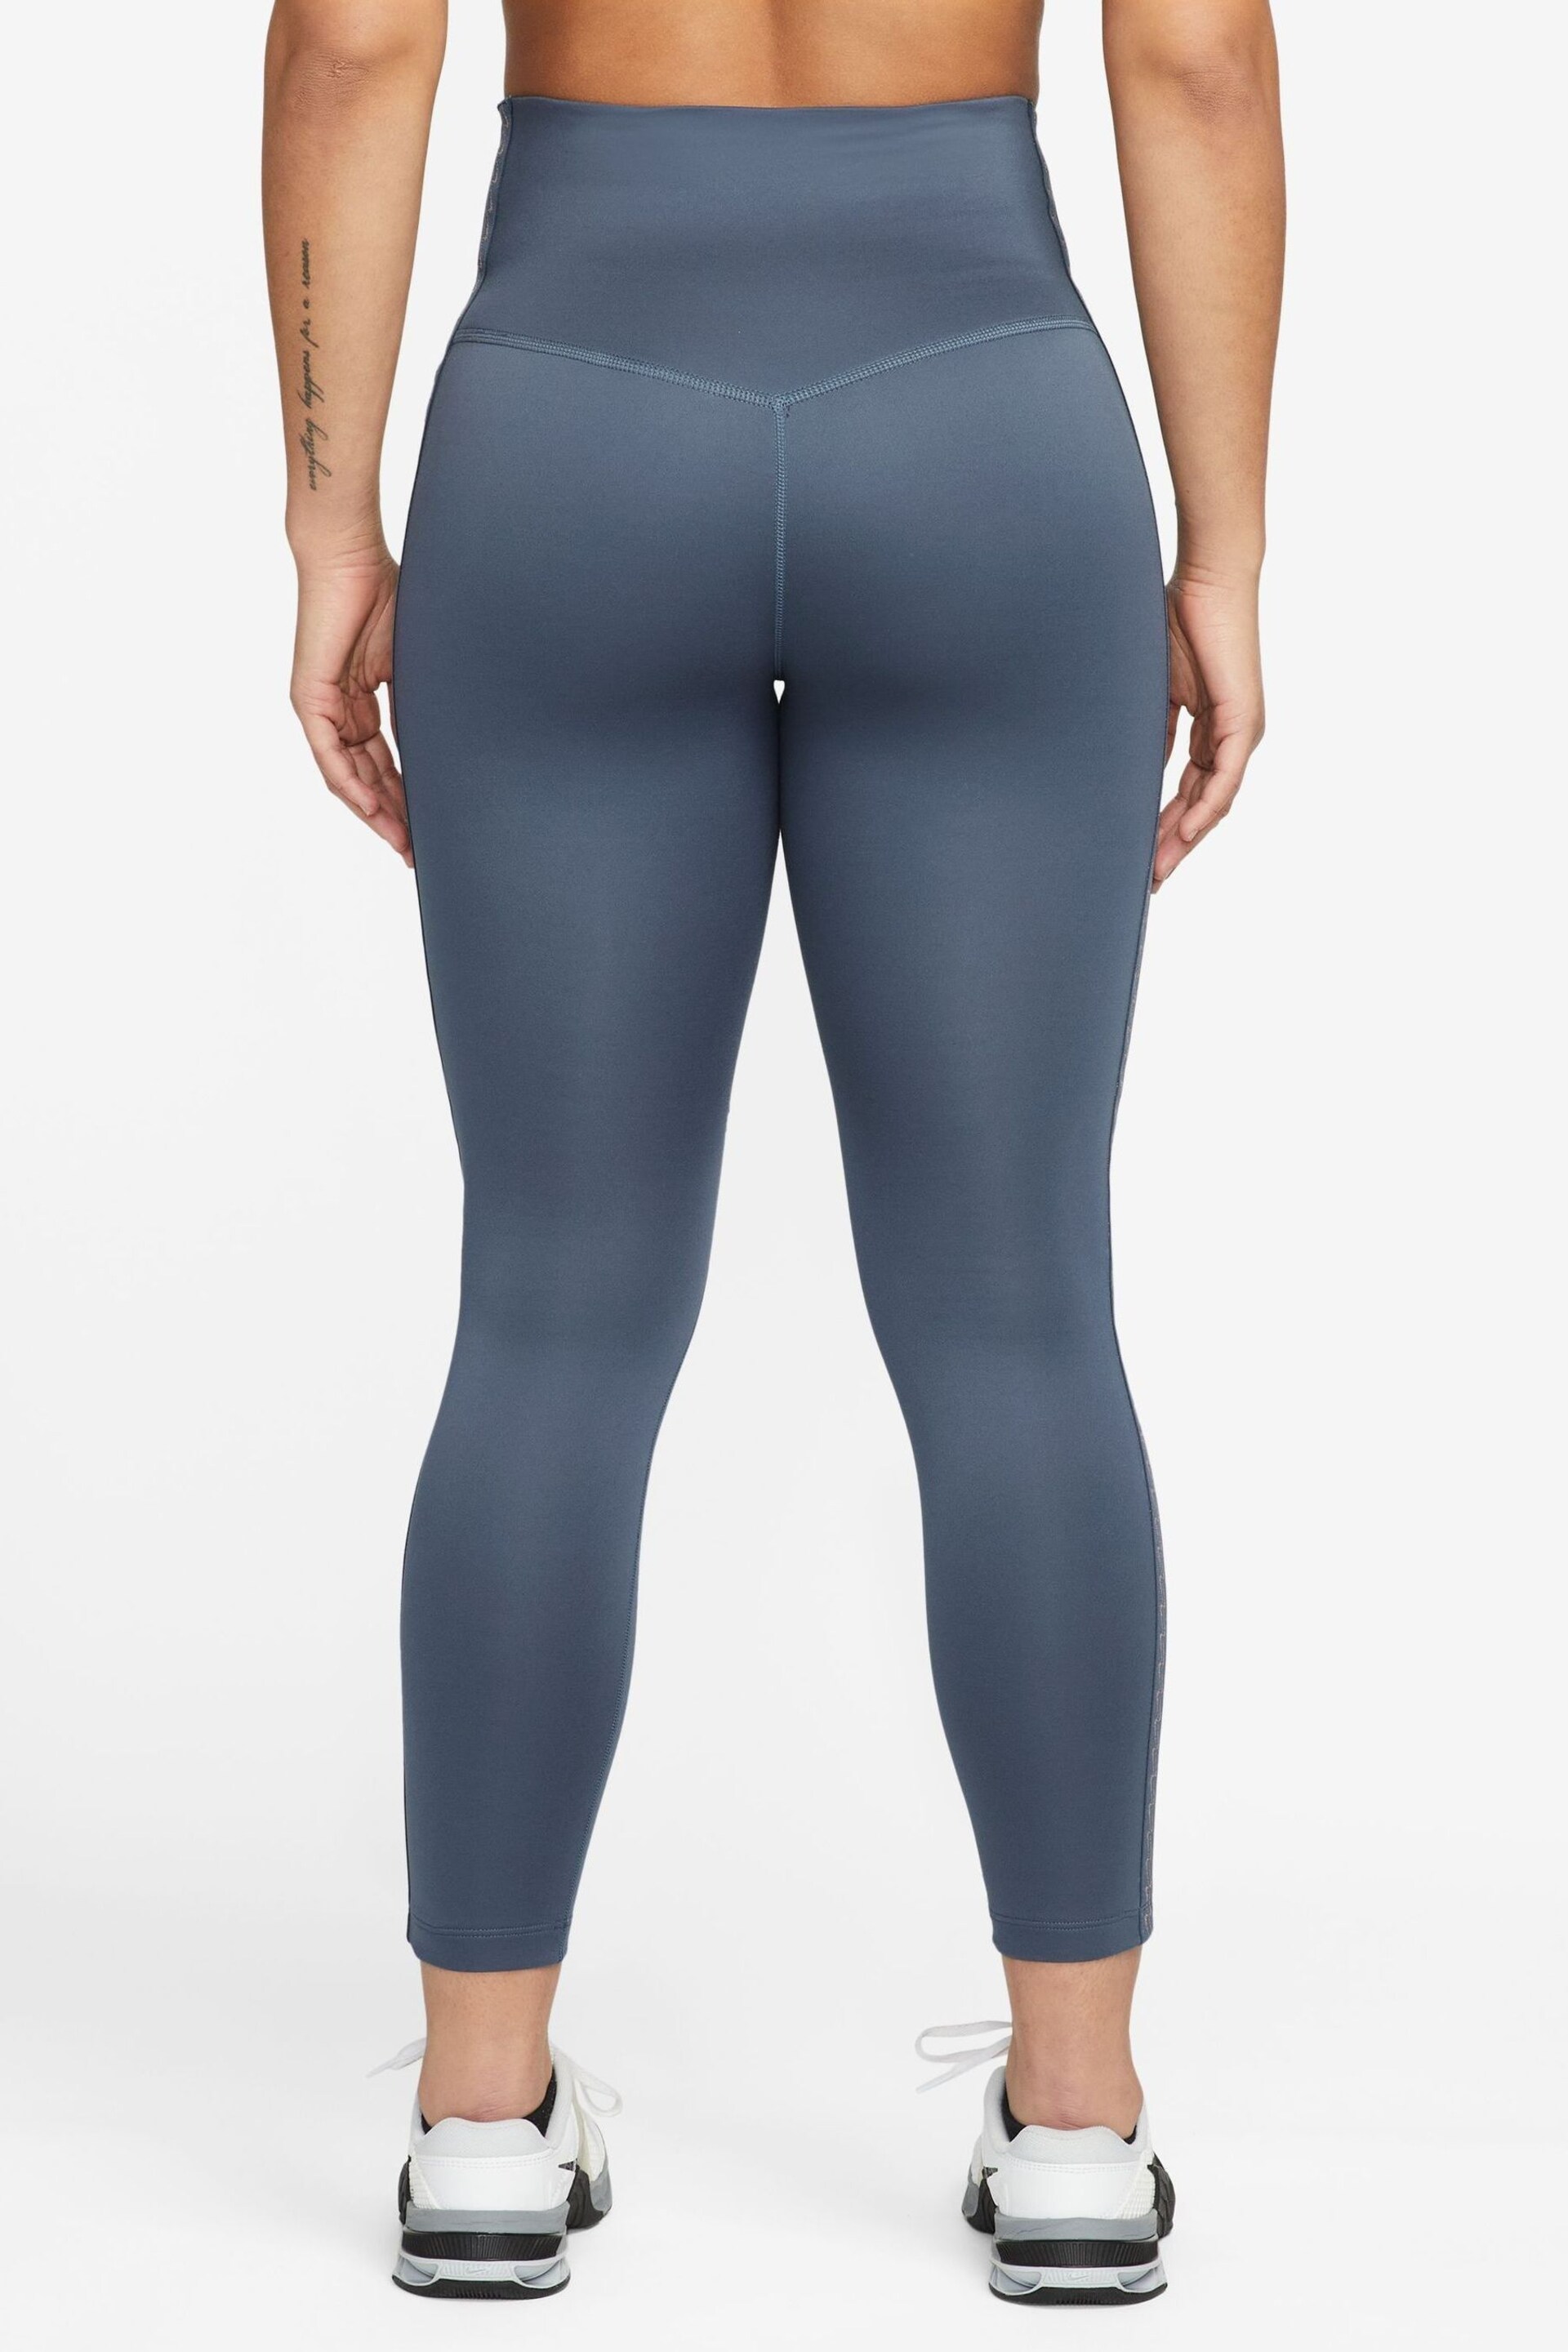 Nike Light Blue Therma-FIT One High-Waisted 7/8 Leggings - Image 2 of 4